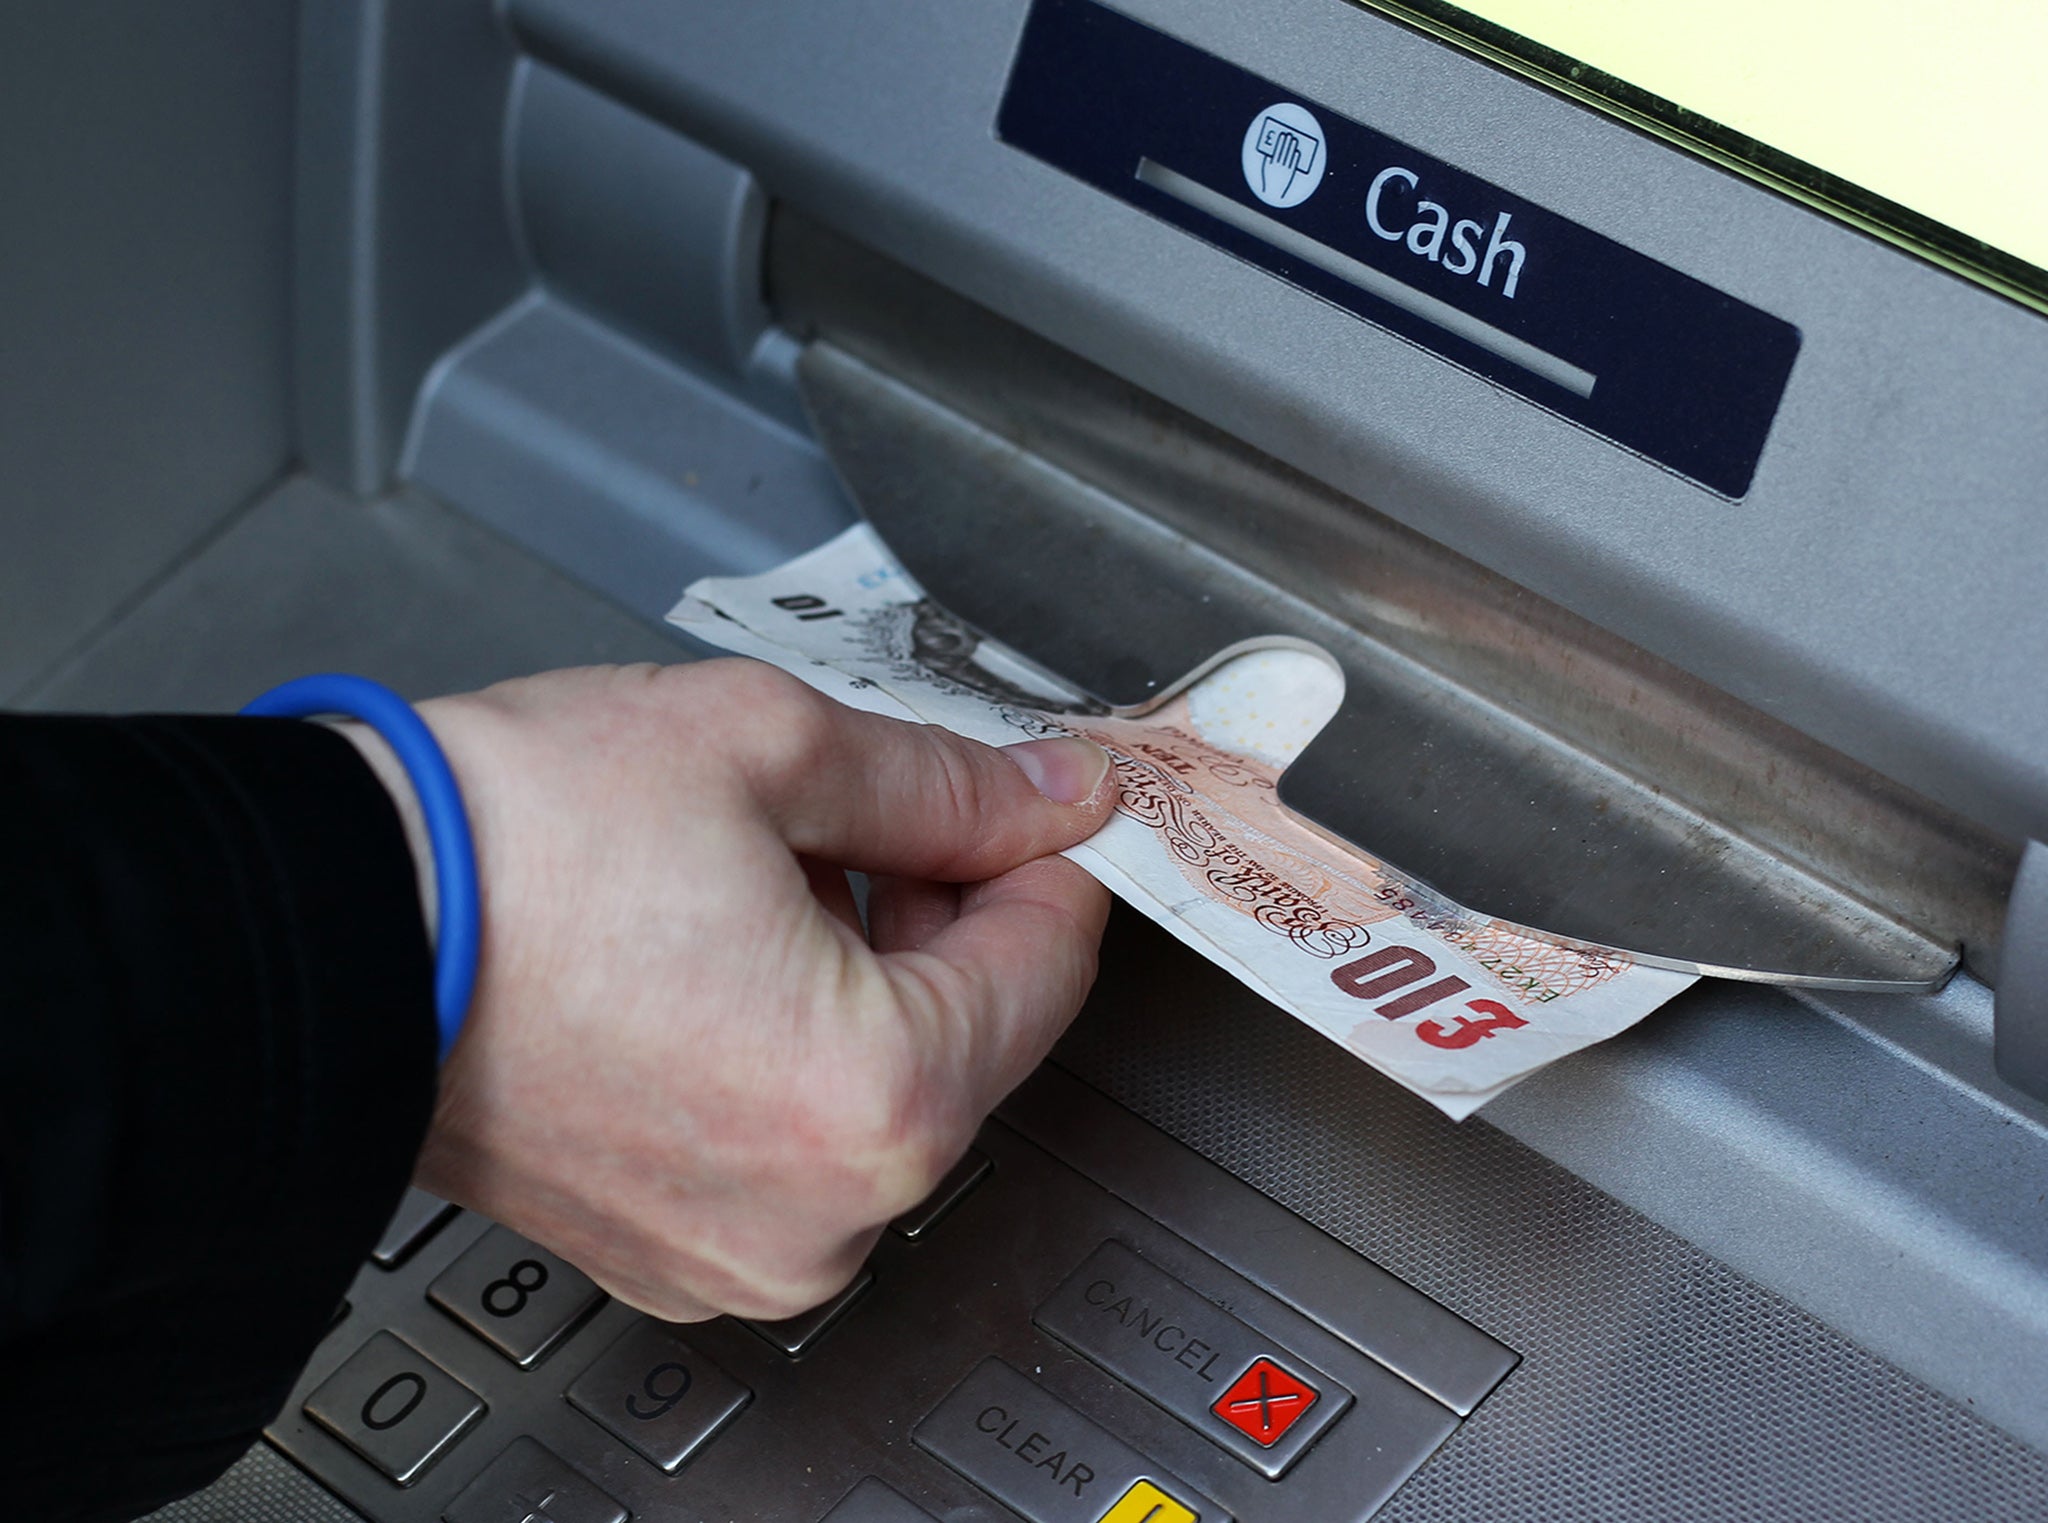 There are currently more than 70,000 ATMs across the UK, around 80 per cent of which are free